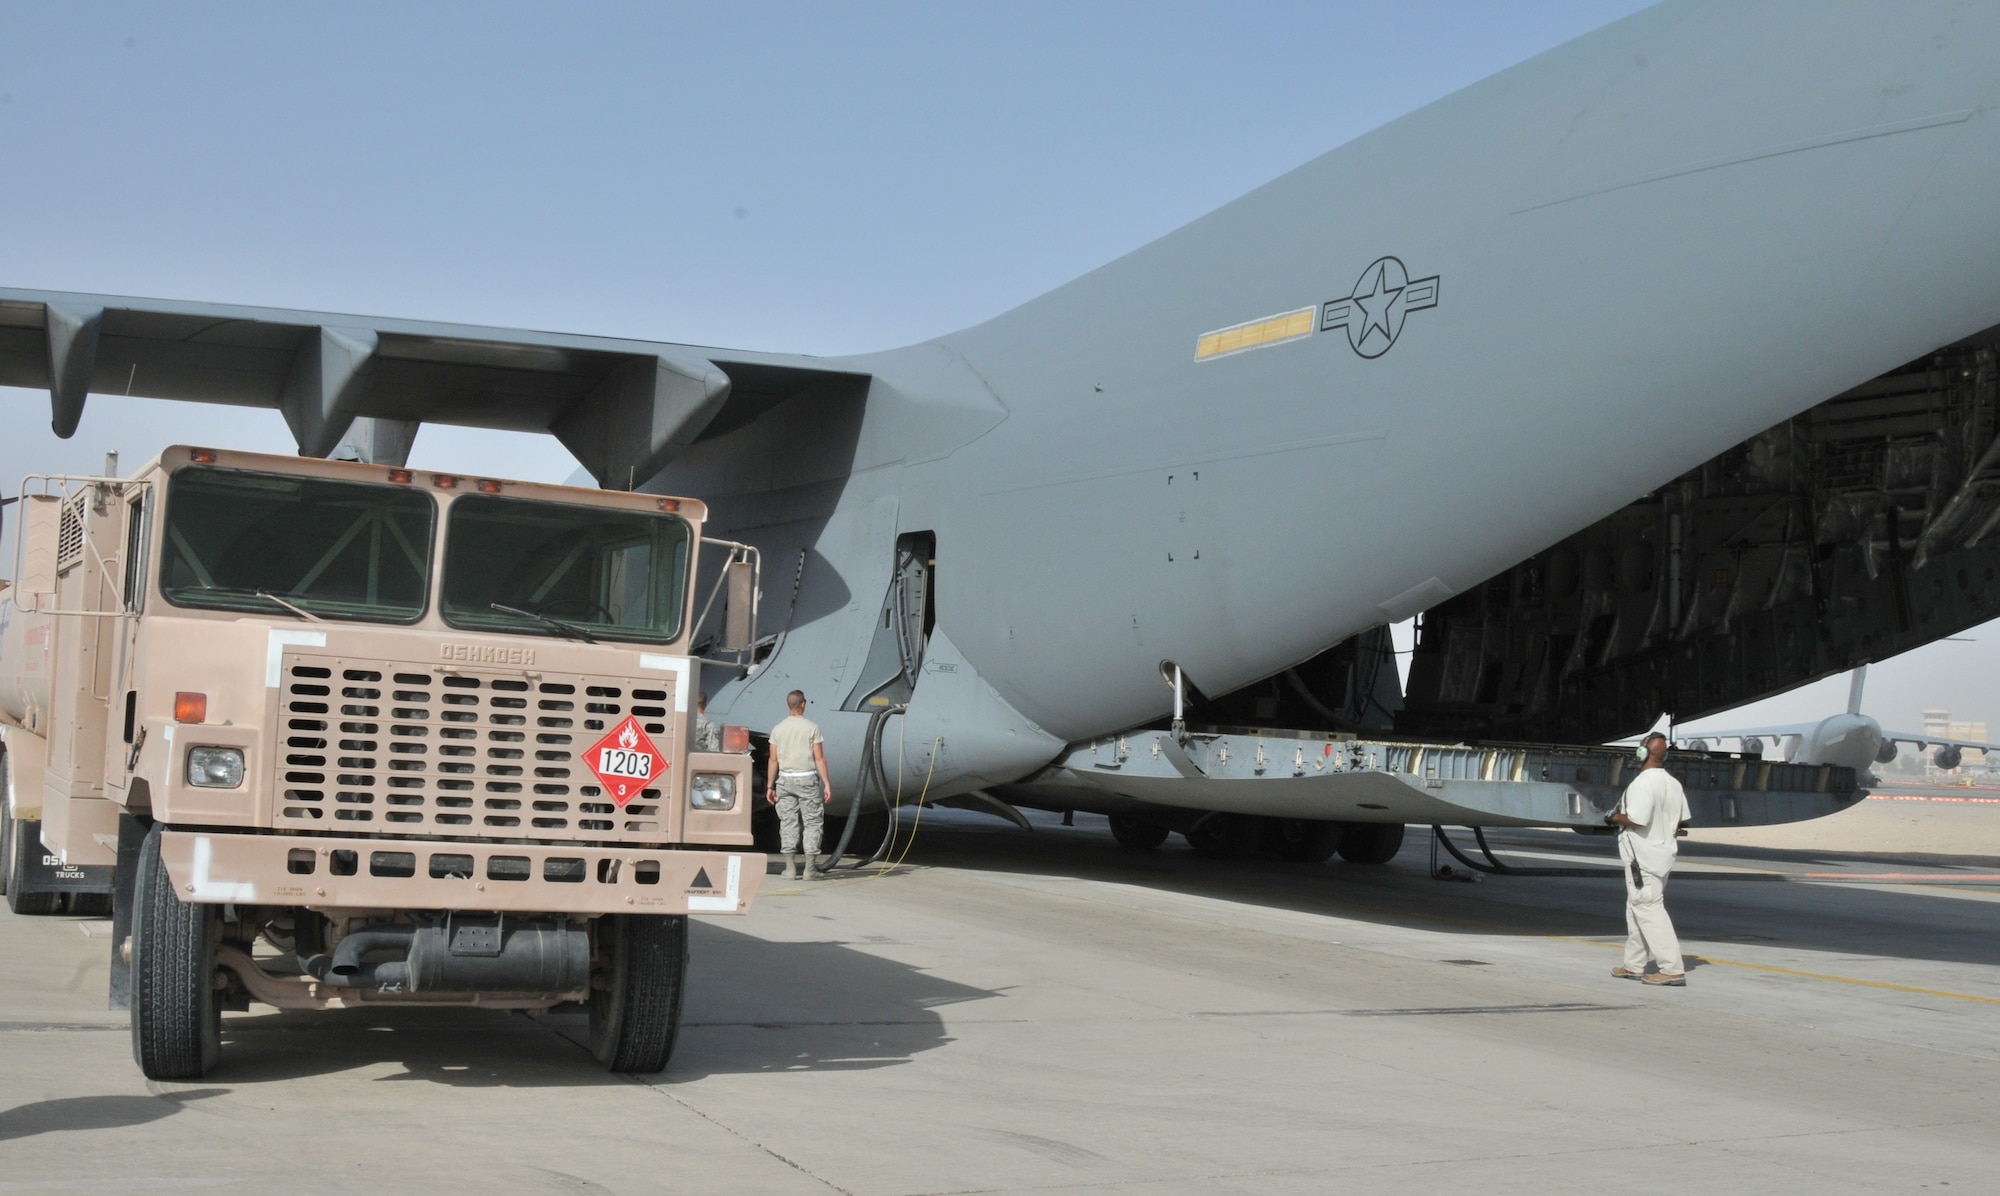 A fuel truck receives aviation gasoline from fuel bladders inside a C-17 Globemaster III Oct. 21, 2011, at an undisclosed location in Southwest Asia. Members from the 379th Expeditionary Logistics Readiness Squadron aerial bulk fuel delivery system transport fuels to different locations throughout the area of responsibility to help maintain mission capabilities. (U.S. Air Force photo/Senior Airman Eric Summers Jr.)